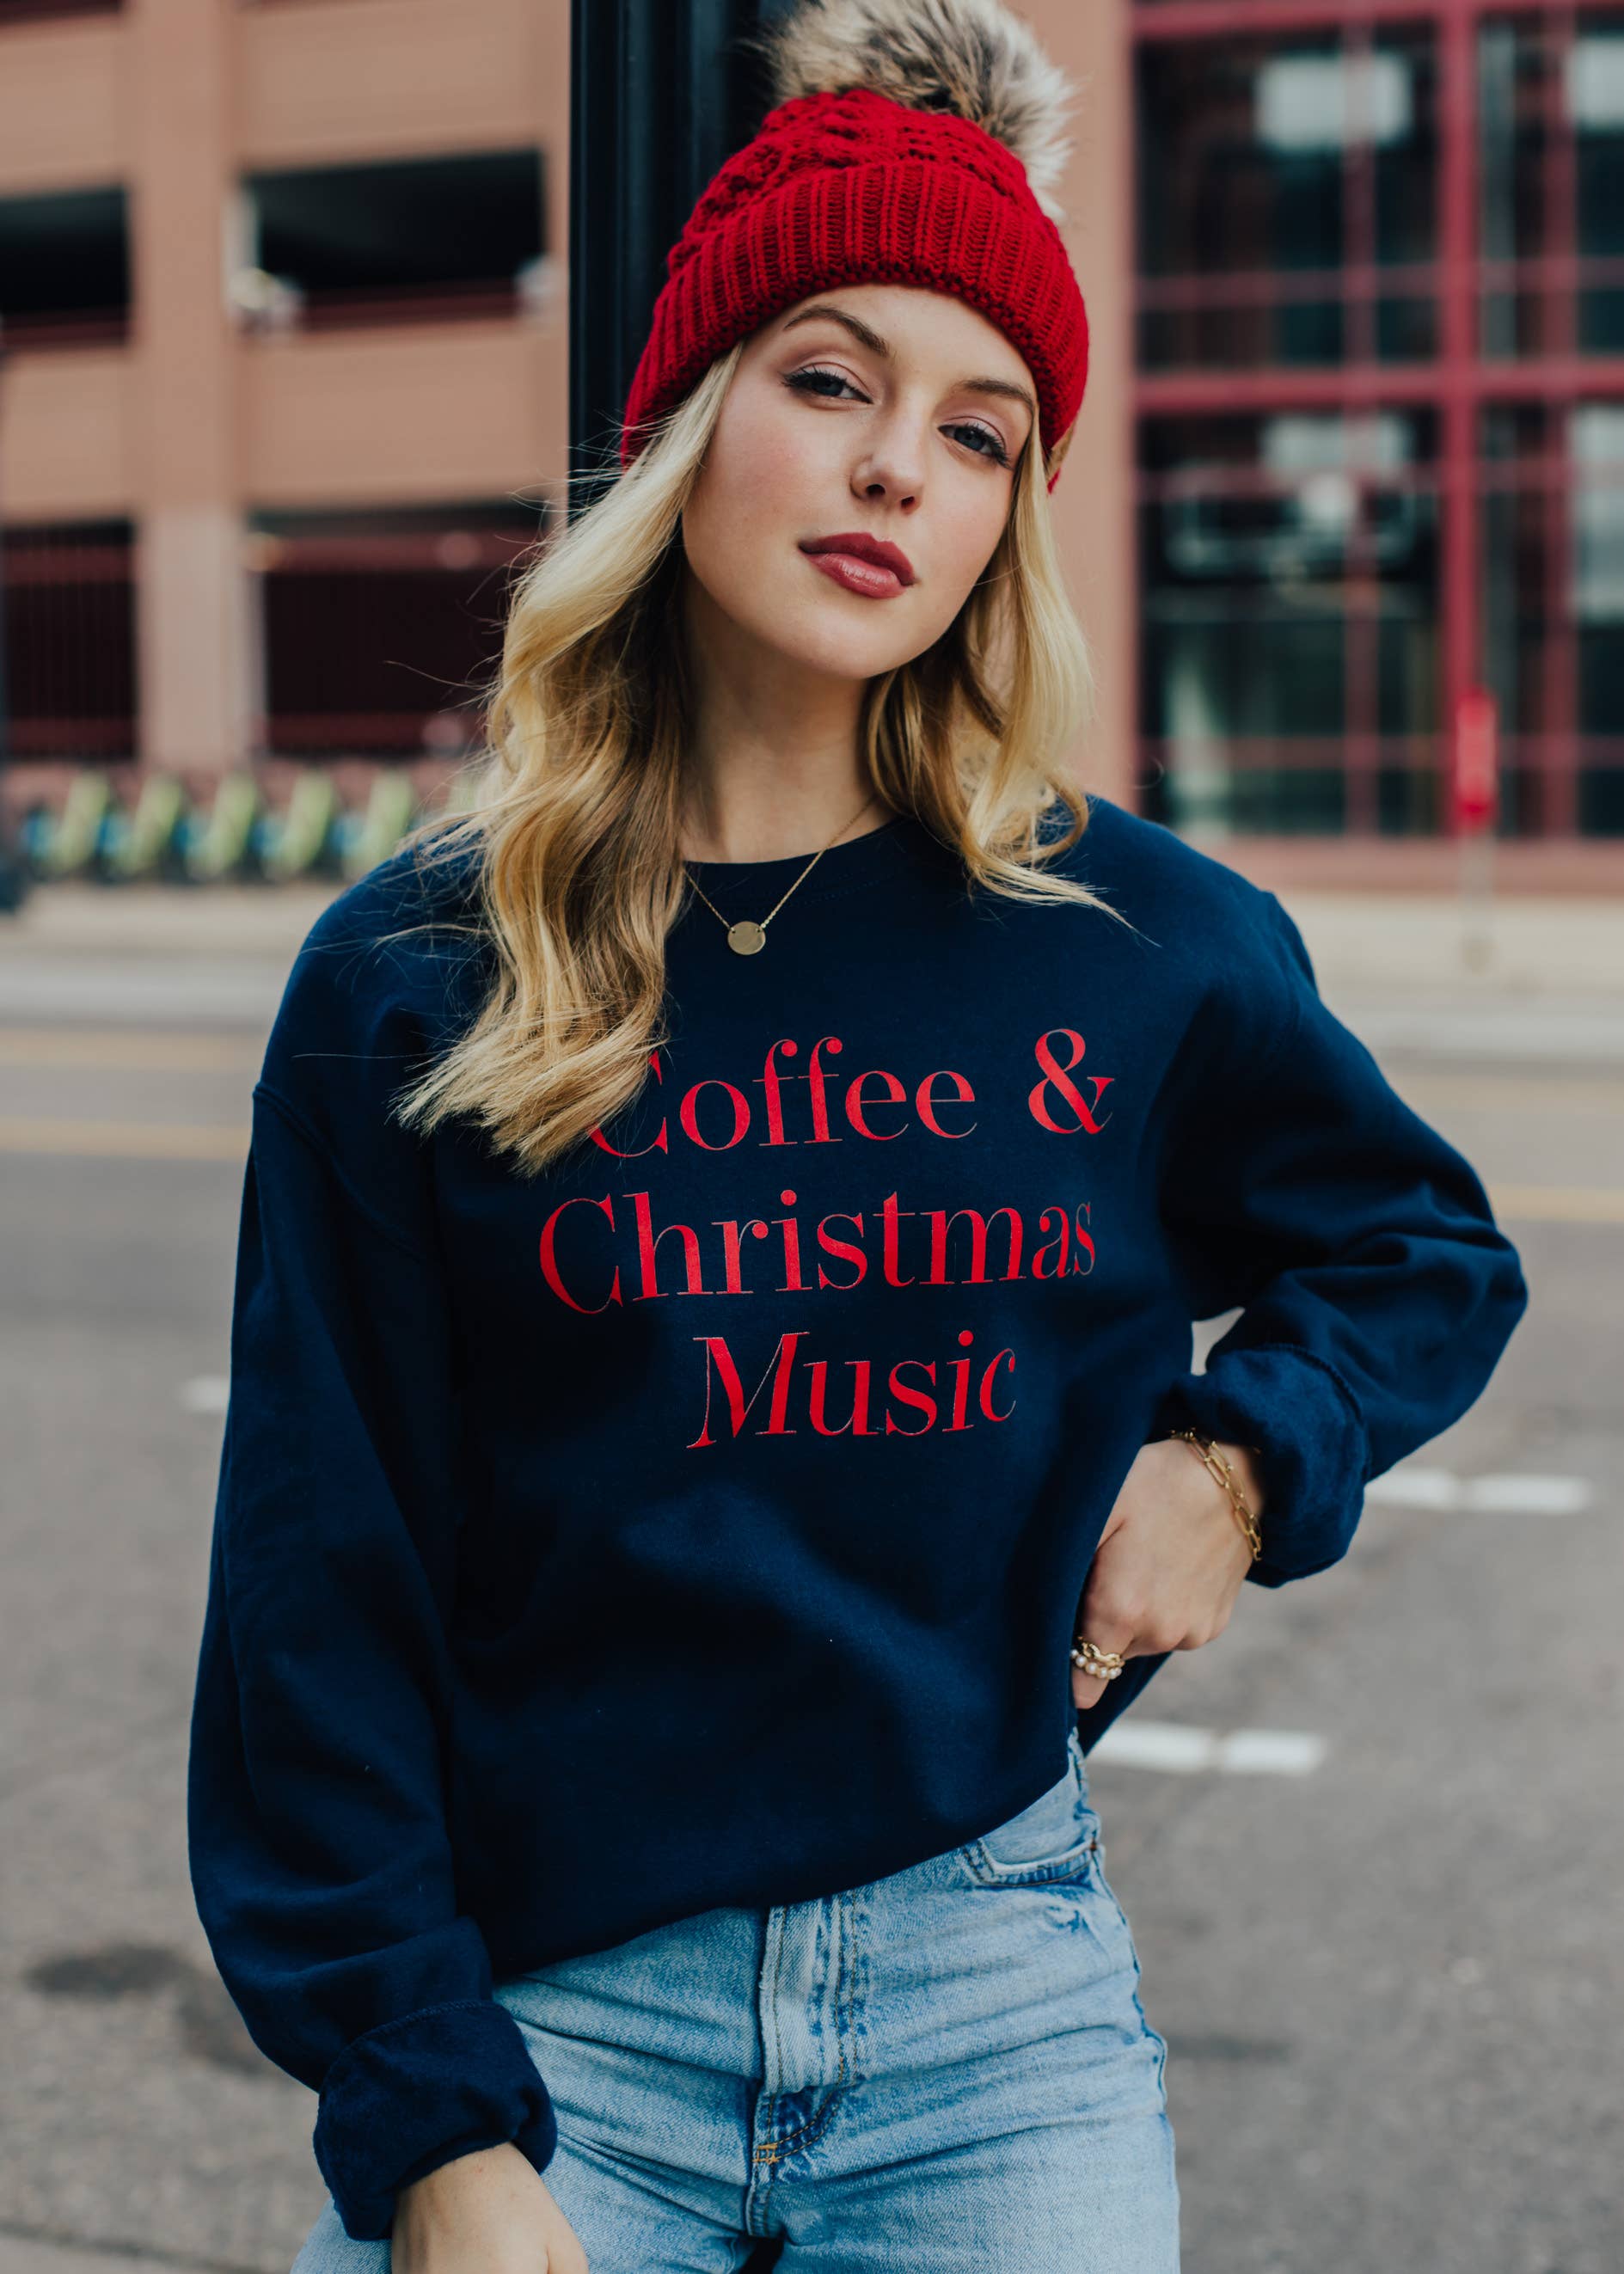 Coffee & Christmas Music Sweatshirt - Forever Western Boutique